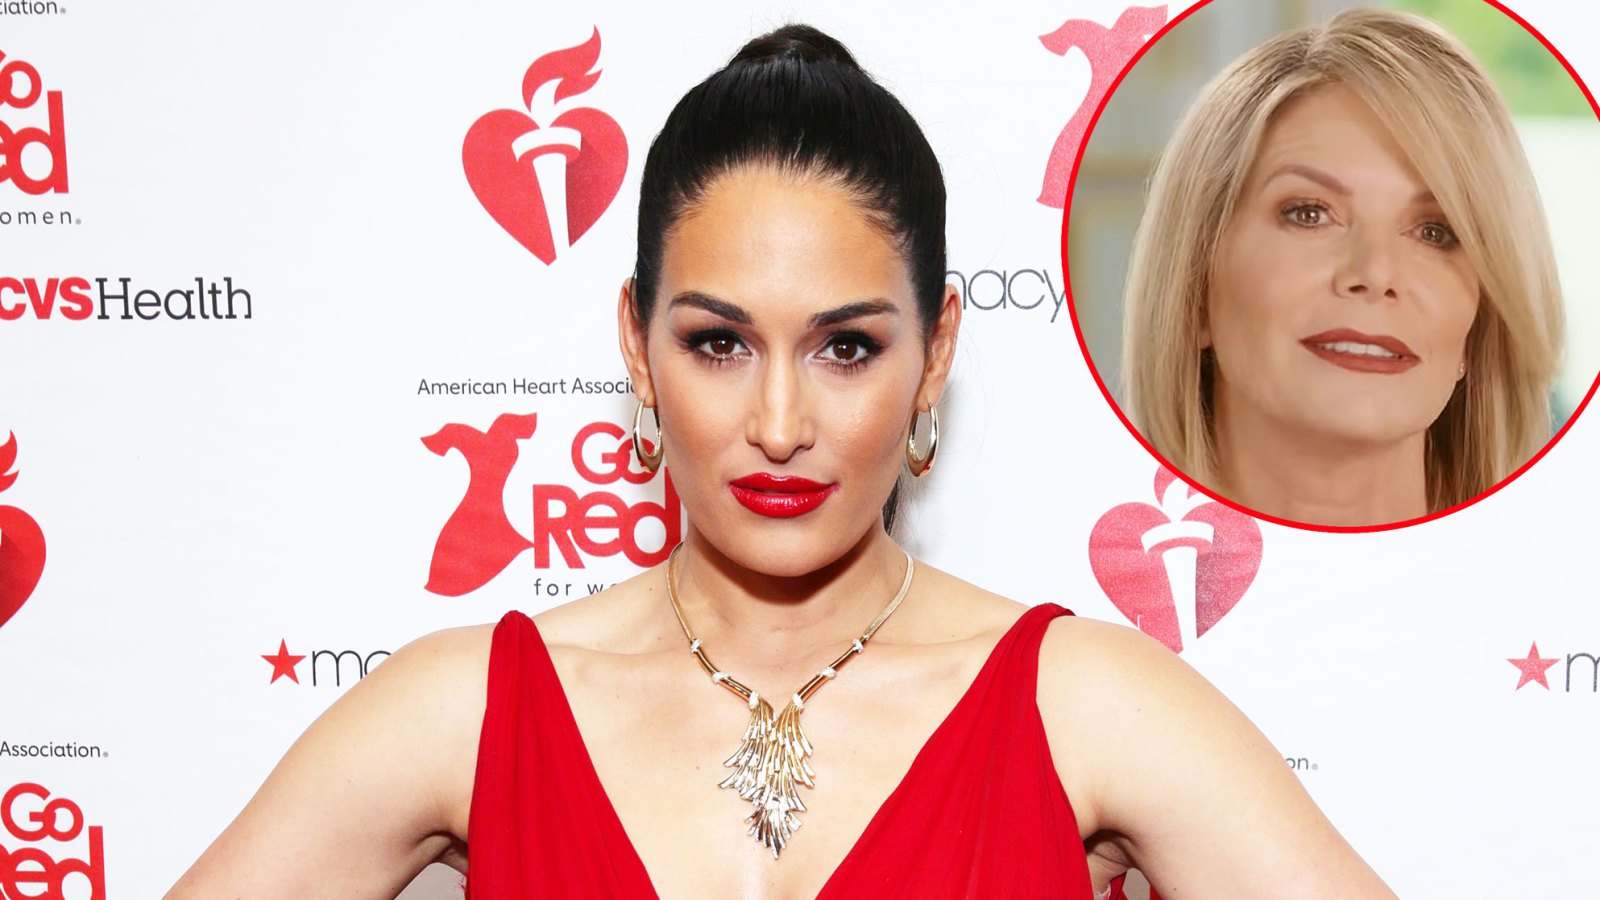 Nikki Bella Reveals Her Mom Learned of Her Sexual Assaults With the Rest of the World